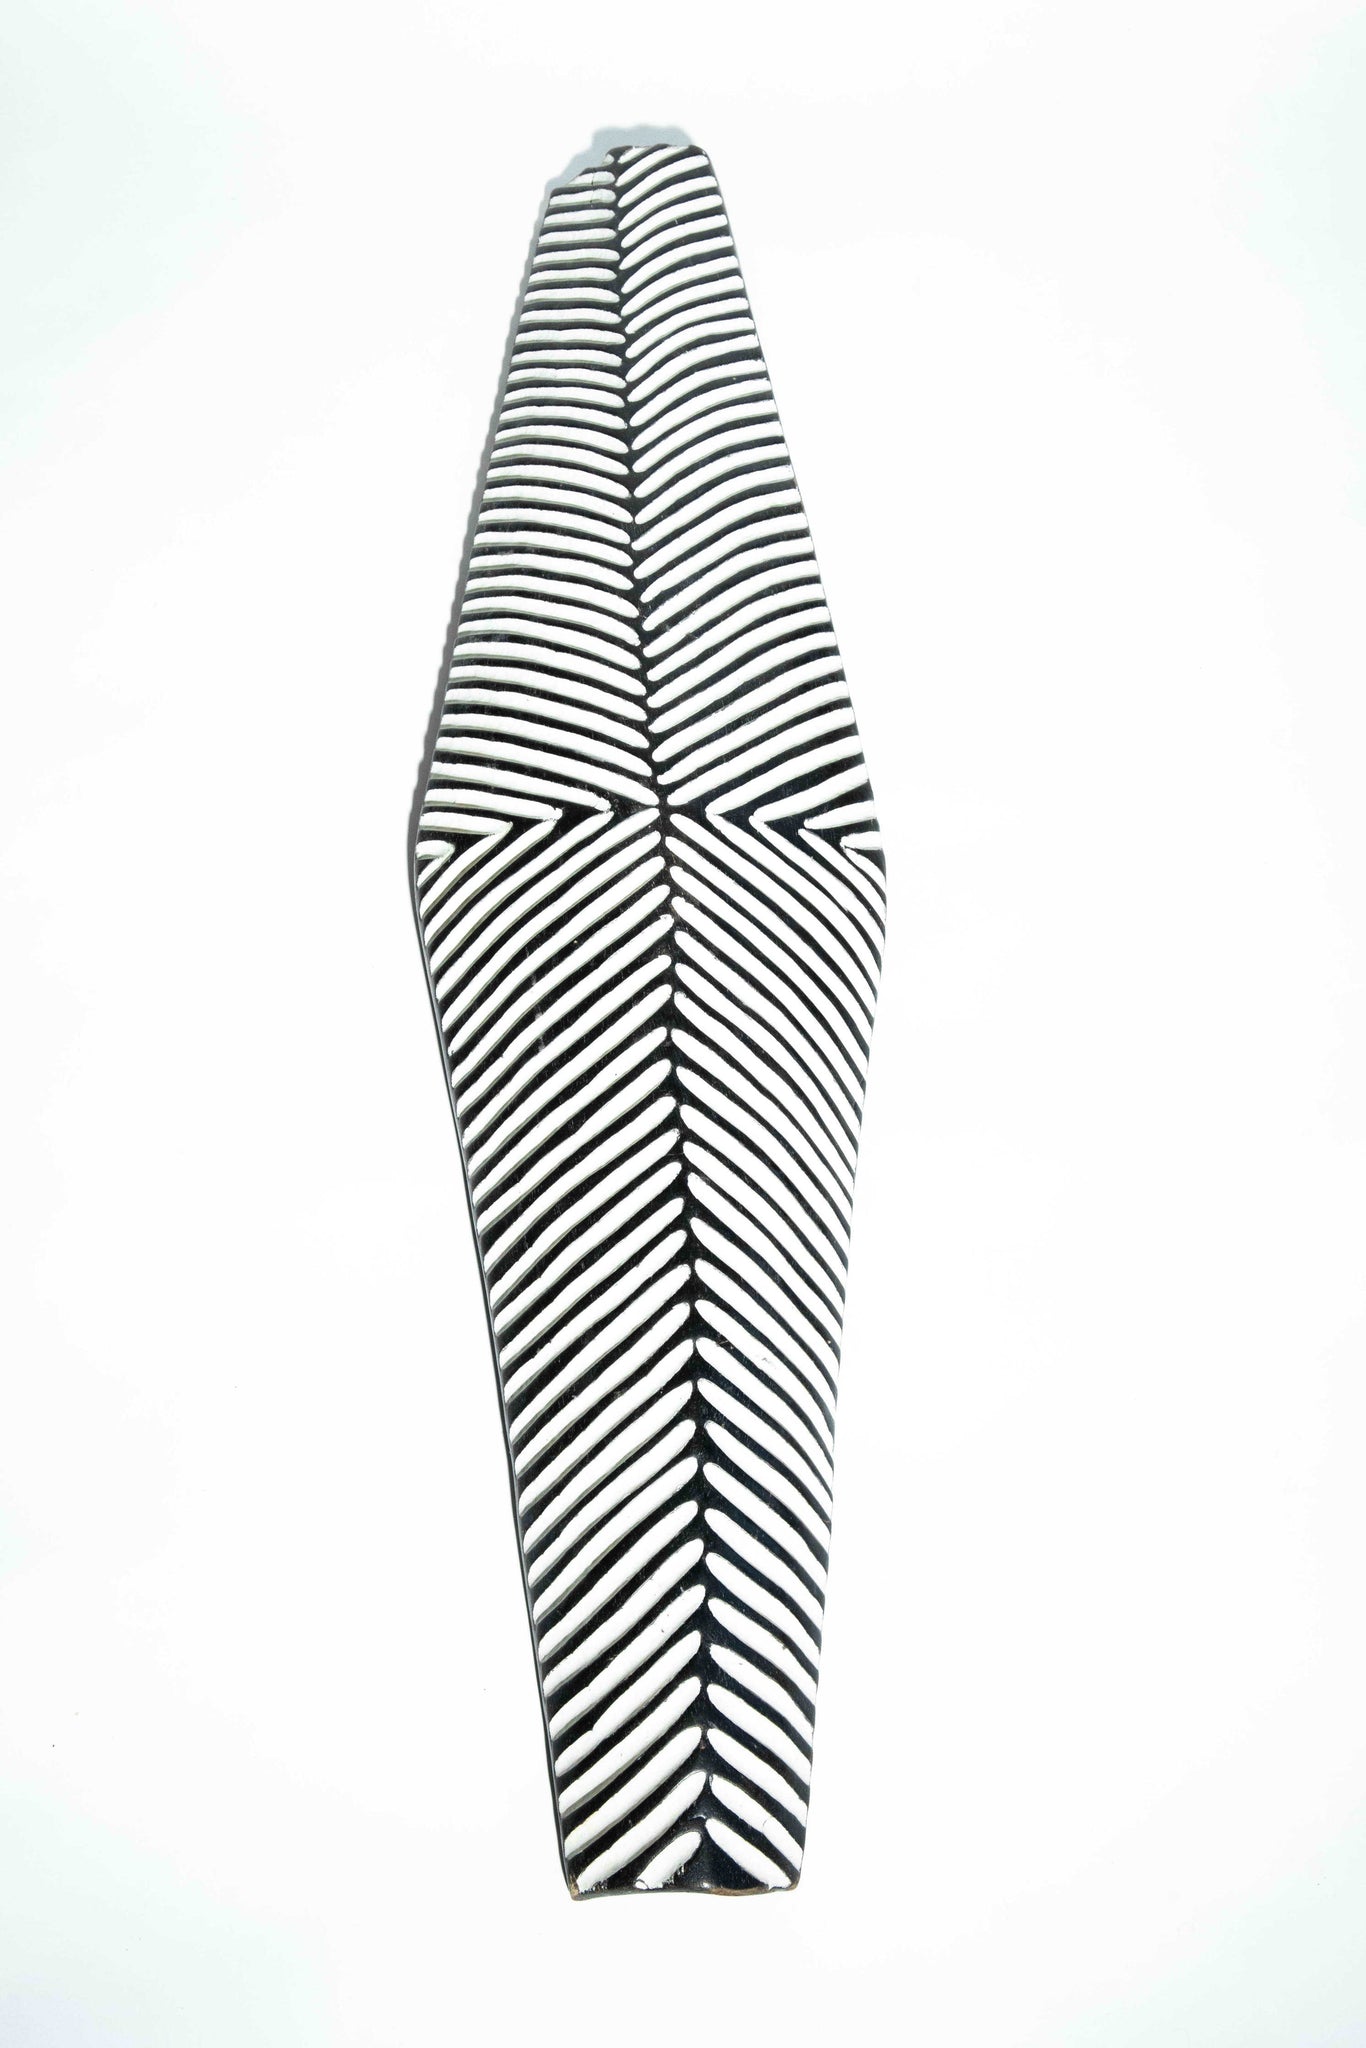 Elongated Black and White Shield  Cameroon